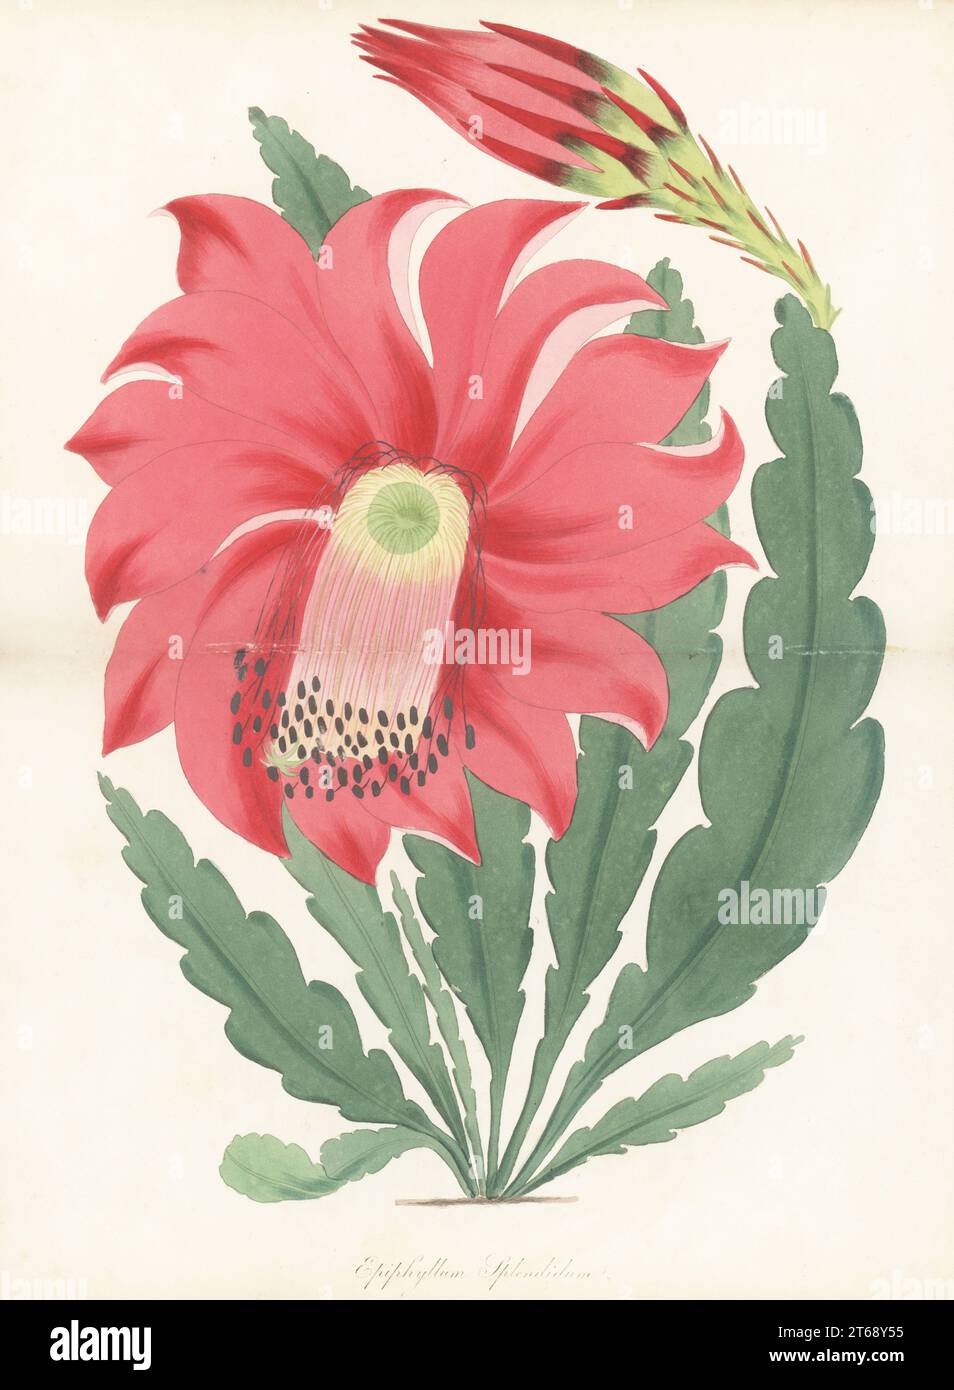 Splendid epiphyllum, Epiphyllum x splendidum. Hybrid climbing cactus raised by nurseryman Mr. Hitchen of Norwich. Native to Central and South America. Handcoloured engraving from Joseph Paxtons Magazine of Botany, and Register of Flowering Plants, Volume 1, Orr and Smith, London, 1834. Stock Photo